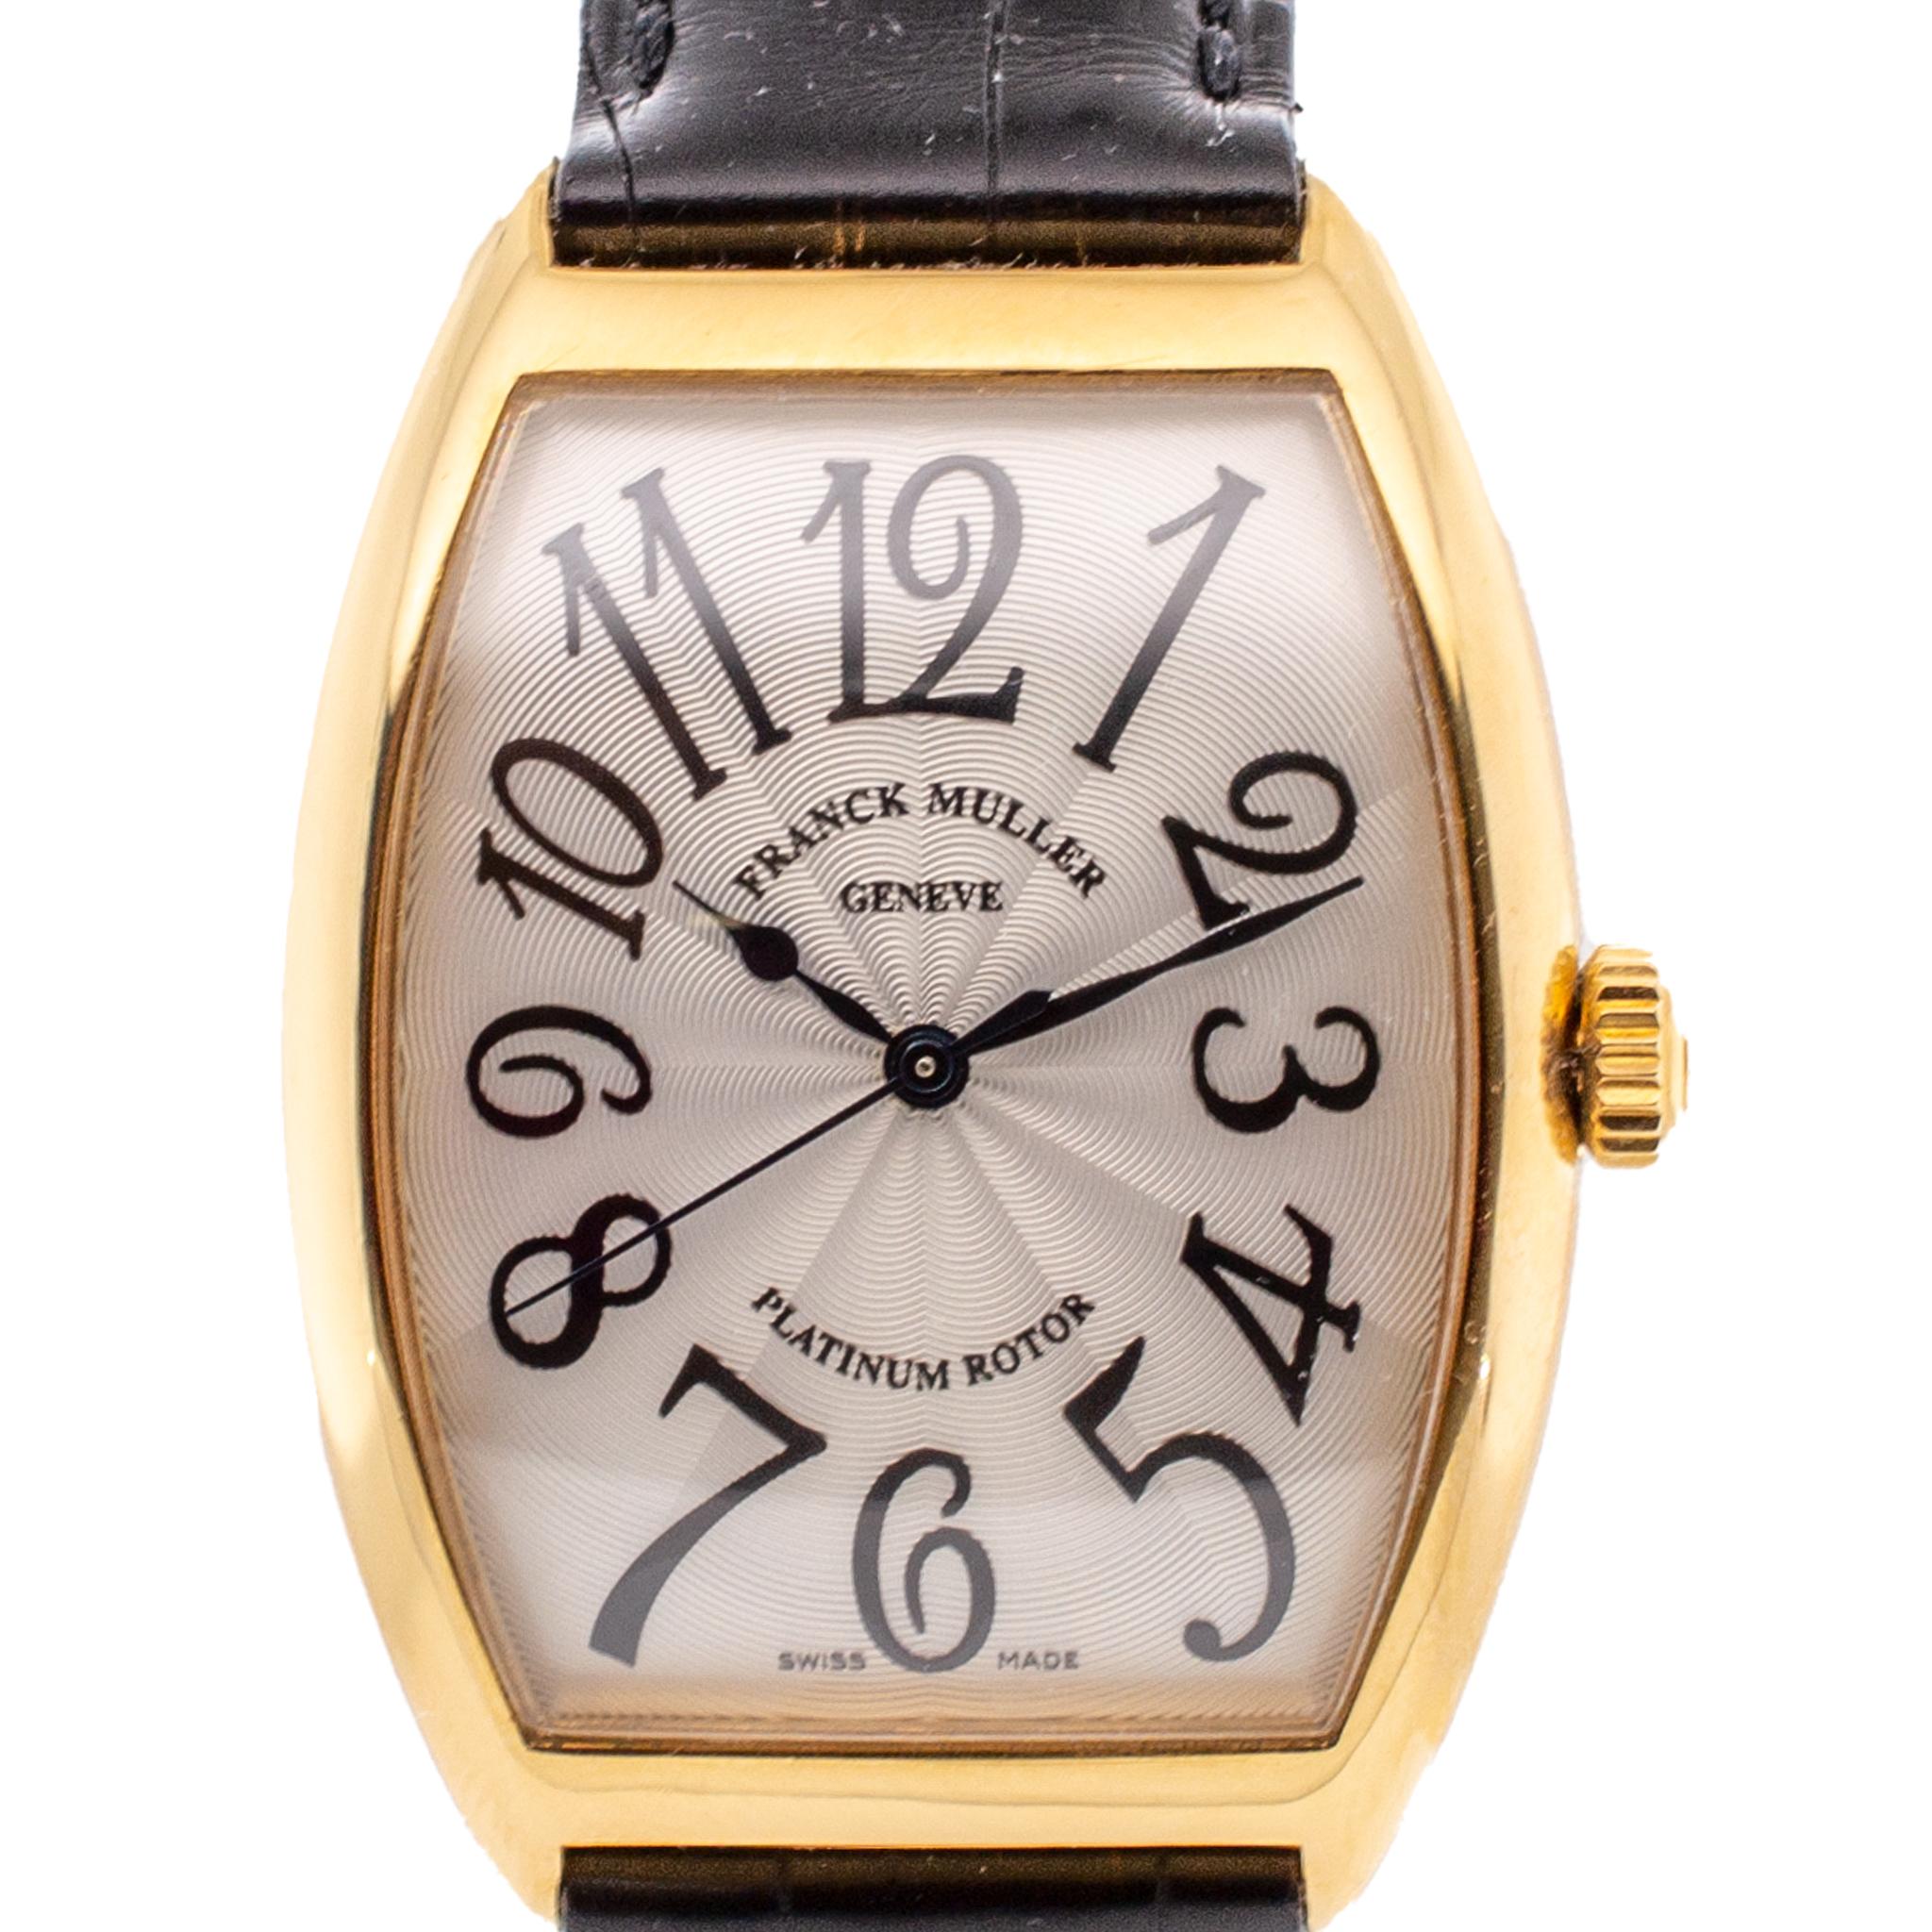 Brand: Franck Muller

Gender: Unisex

Case Material: 18K Yellow Gold

Total Weight: 81.70 grams.
 
Engraved with 